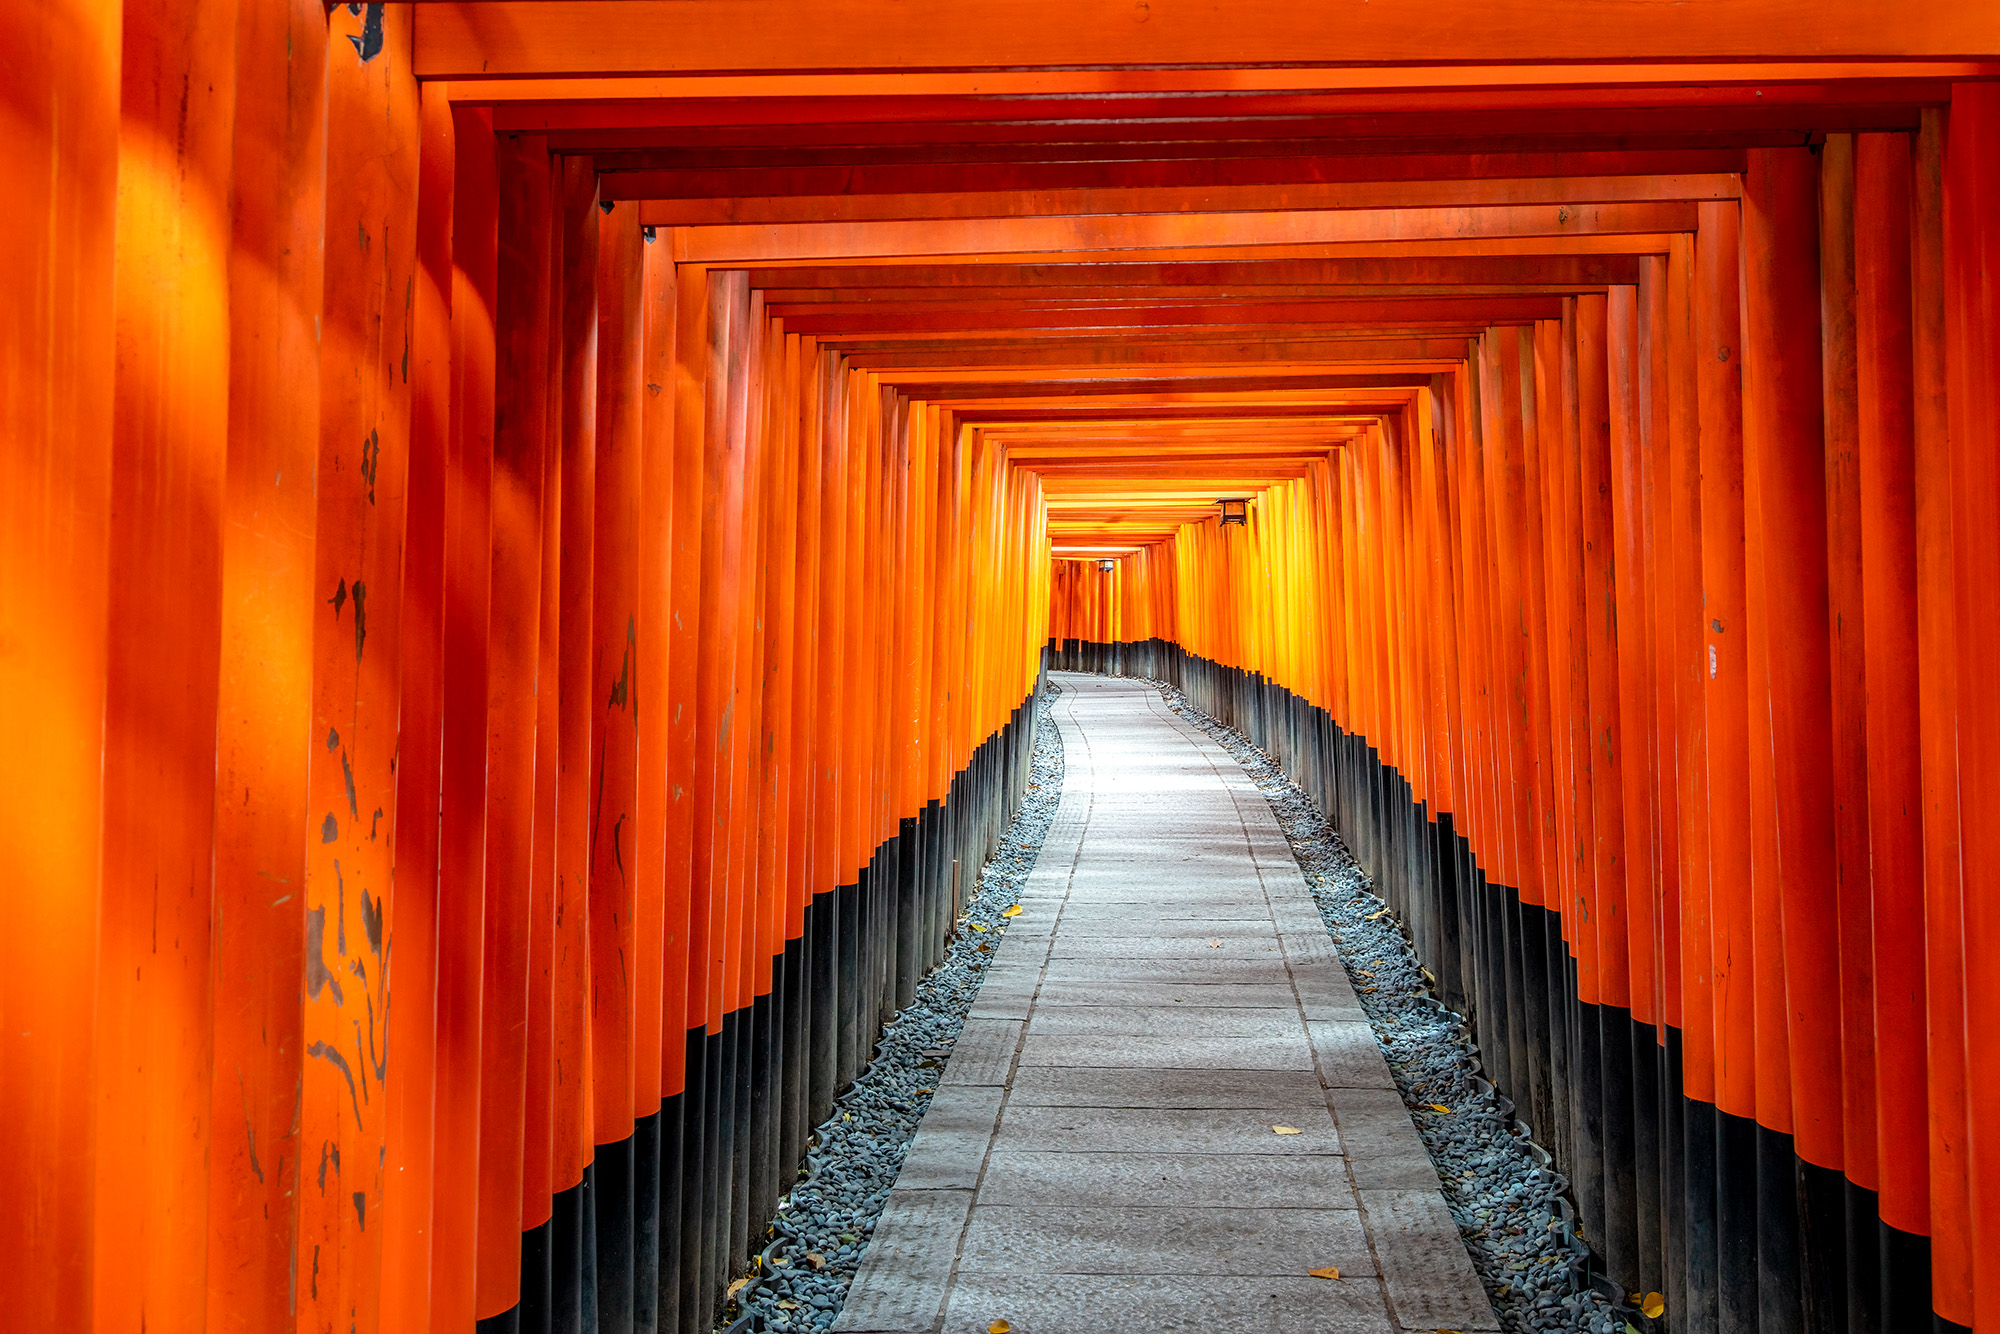 "Path of Unity" captures a harmonious spectacle at Fushimi Inari Temple, Japan. A convergence of meticulously aligned torii gates...